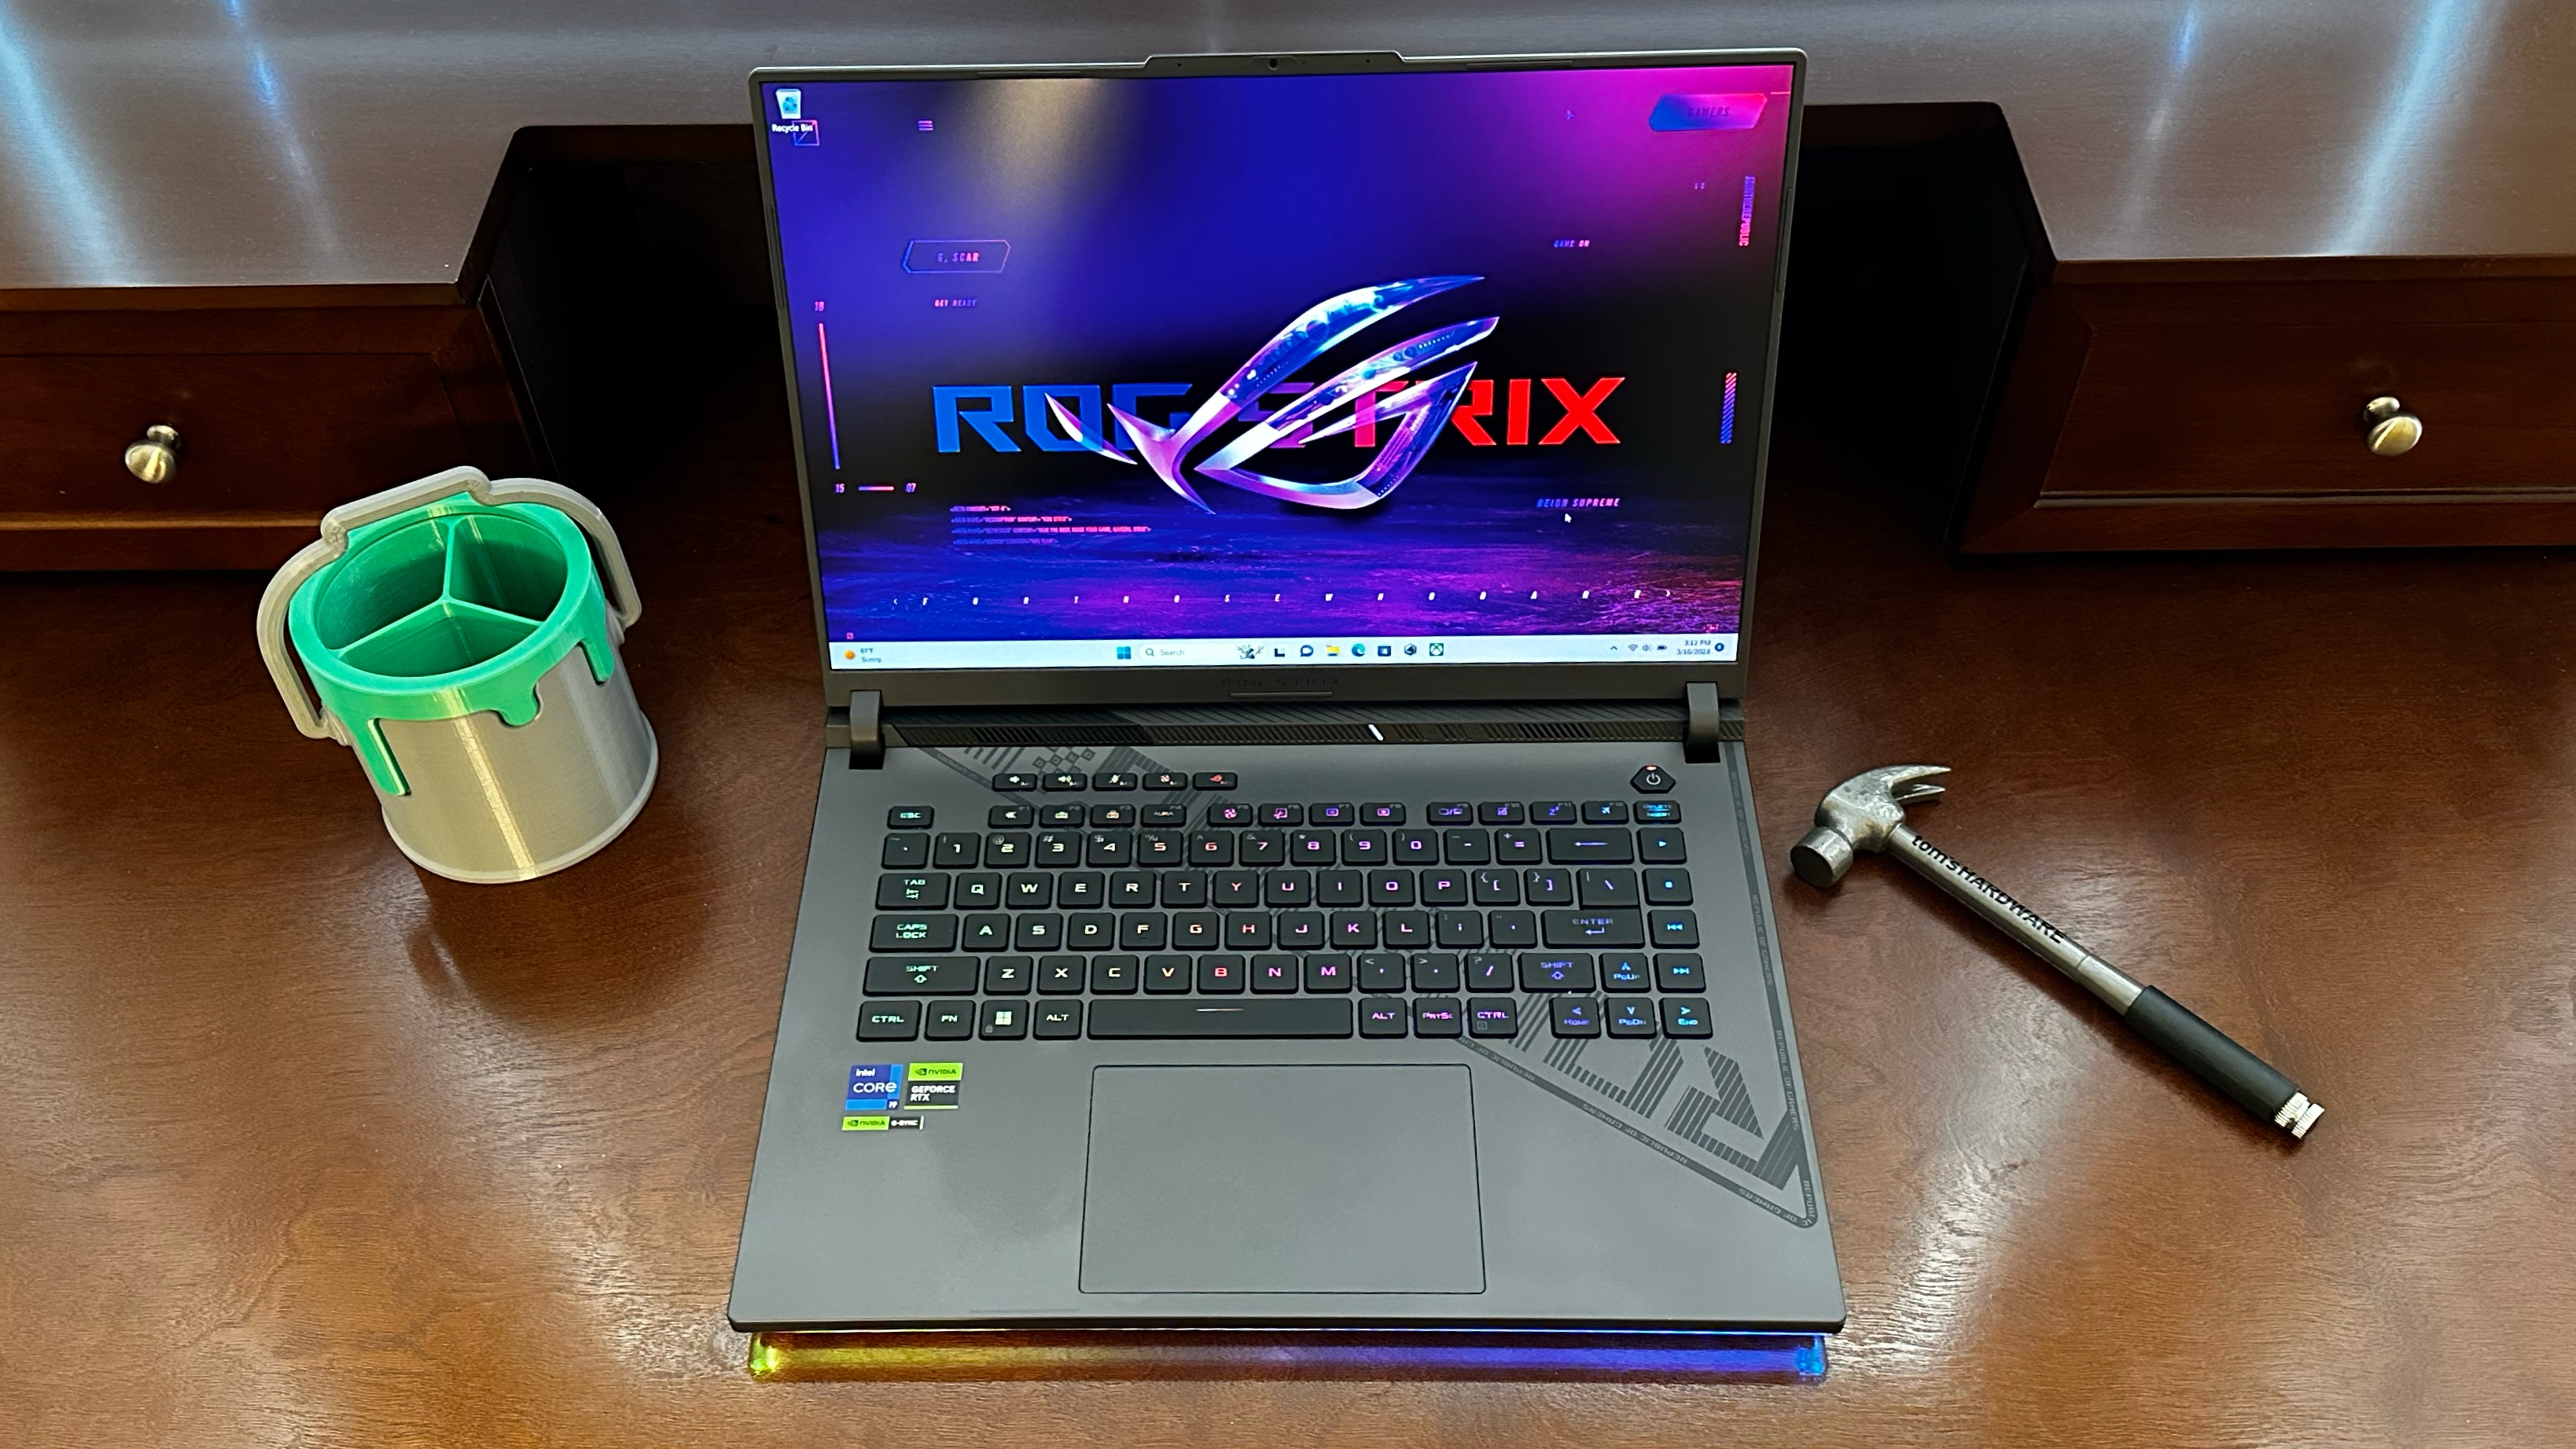 Asus ROG Strix G16 review: A powerful laptop with cyberpunk styling